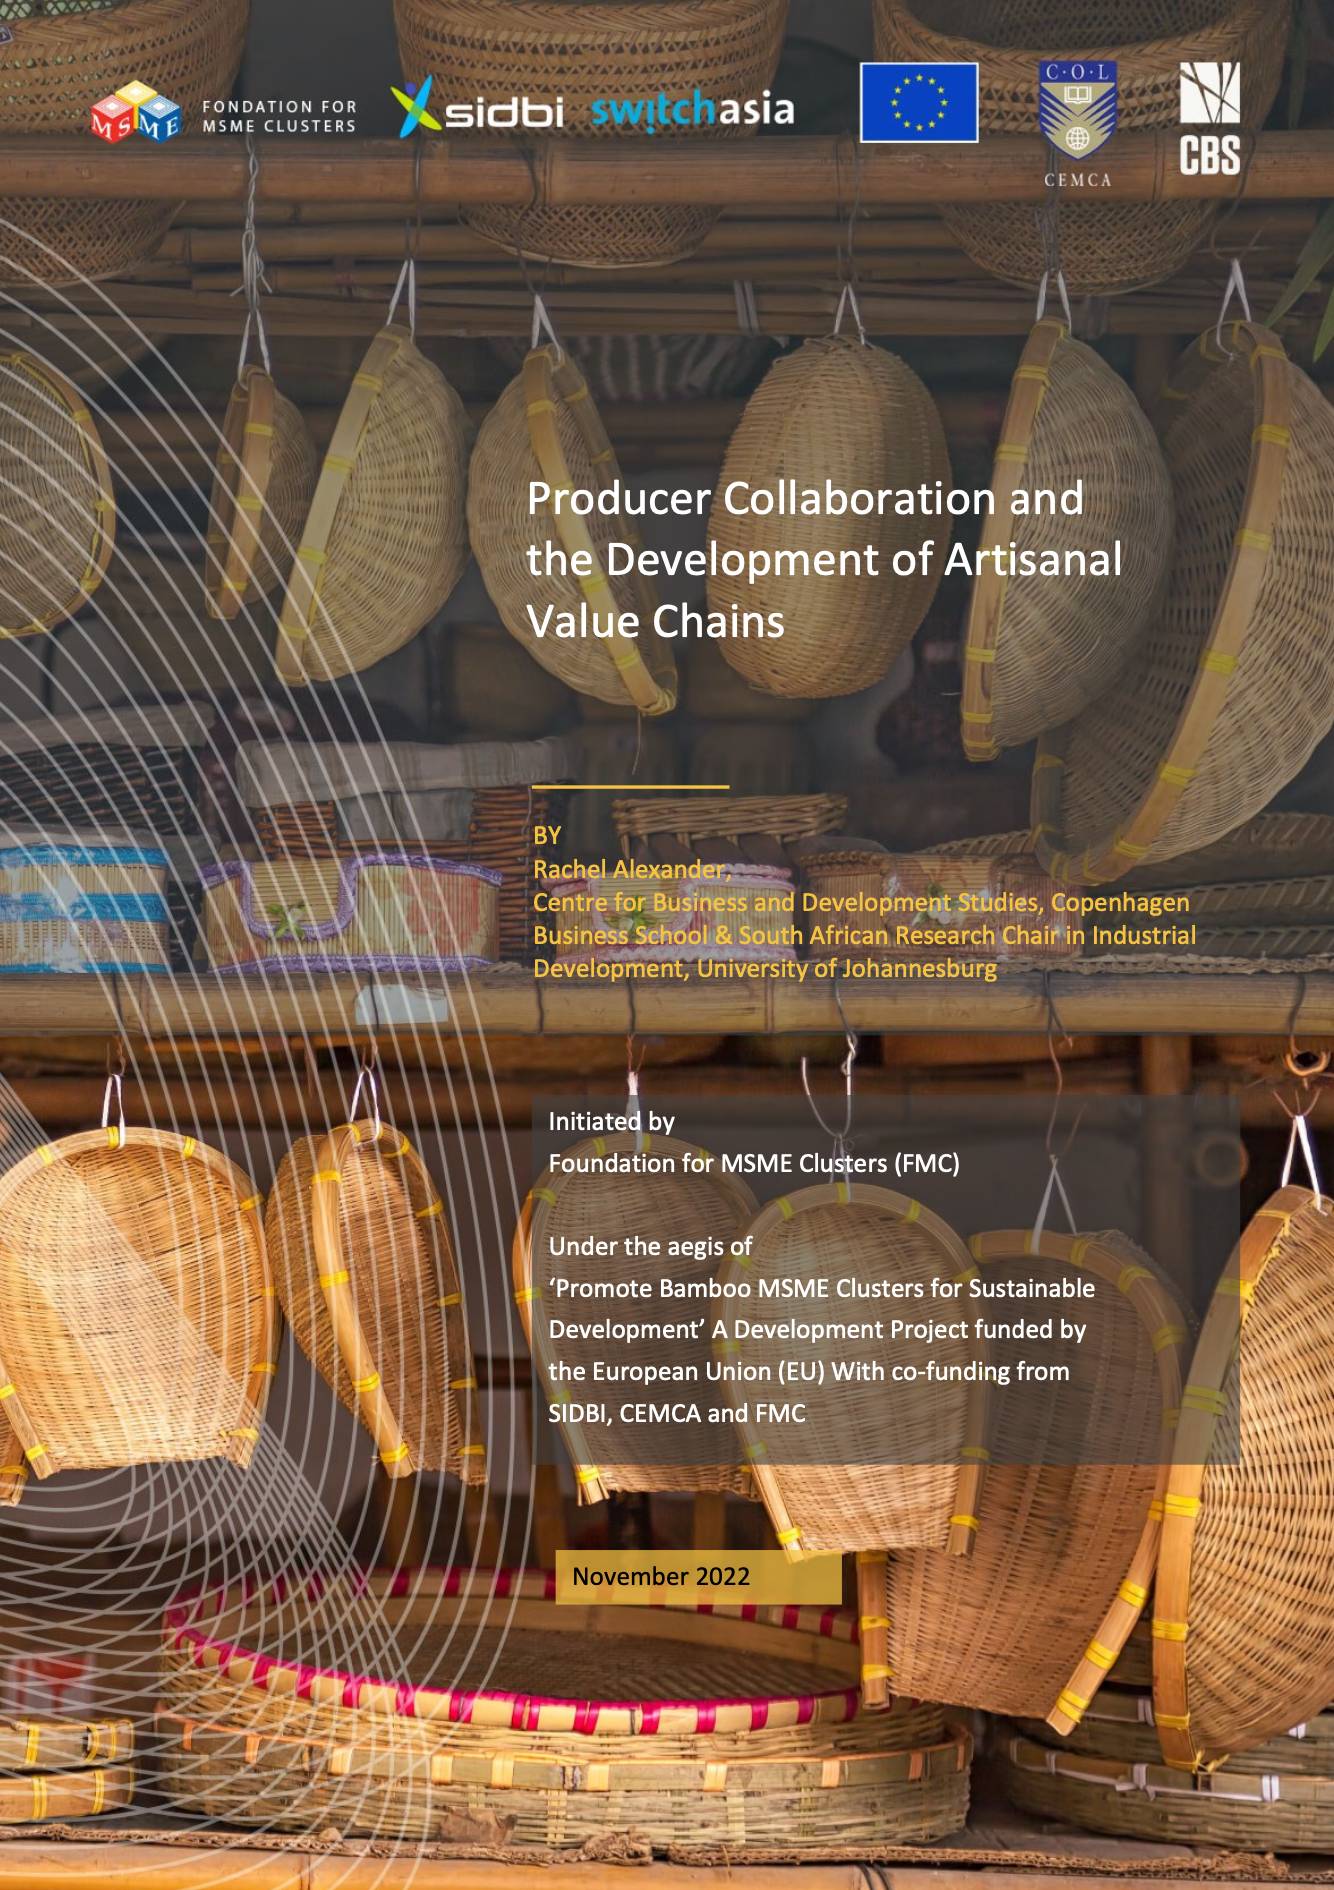 Producer Collaboration and the Development of Artisanal Value Chains